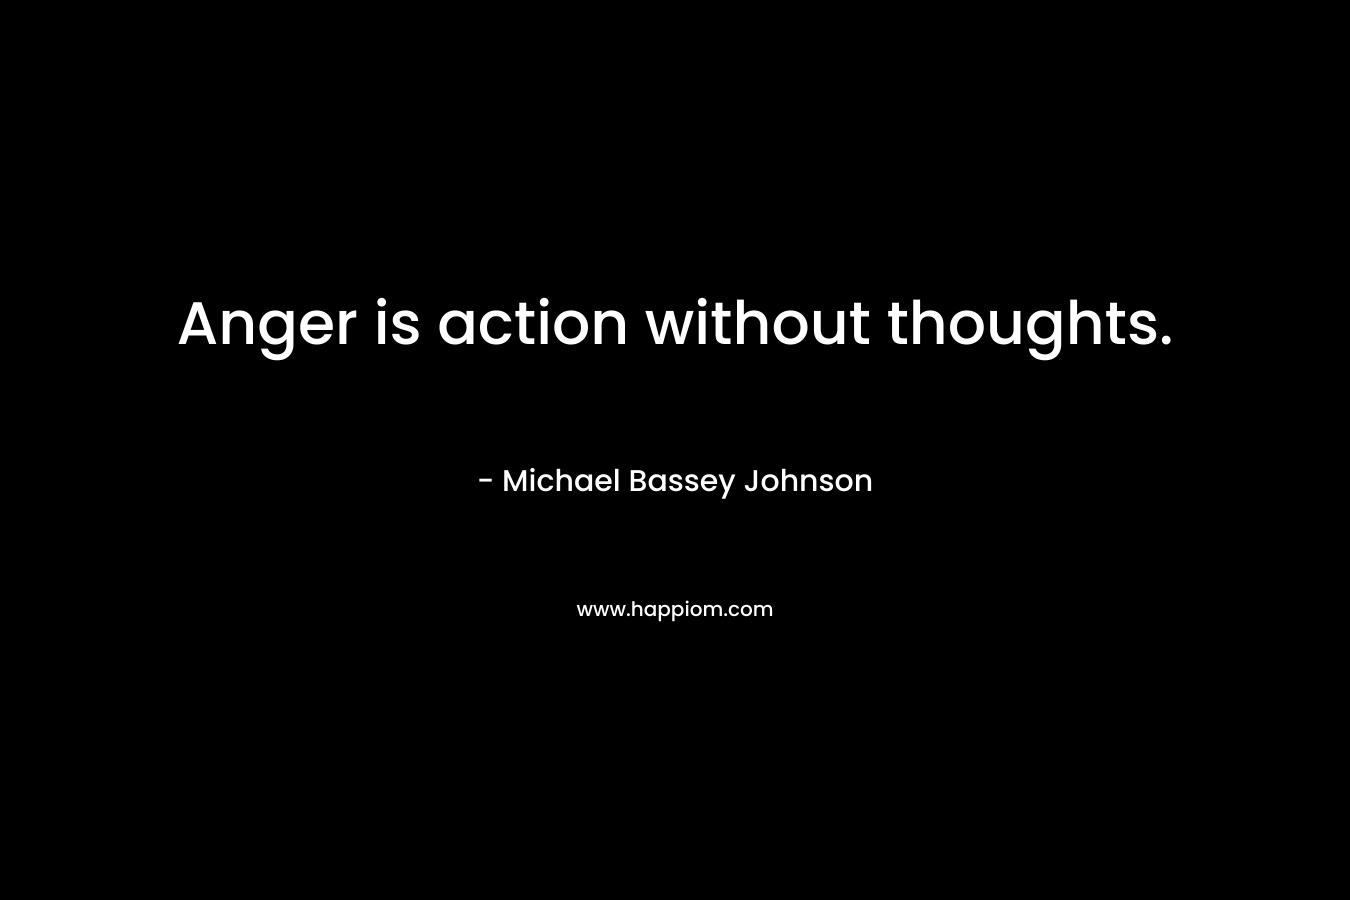 Anger is action without thoughts.